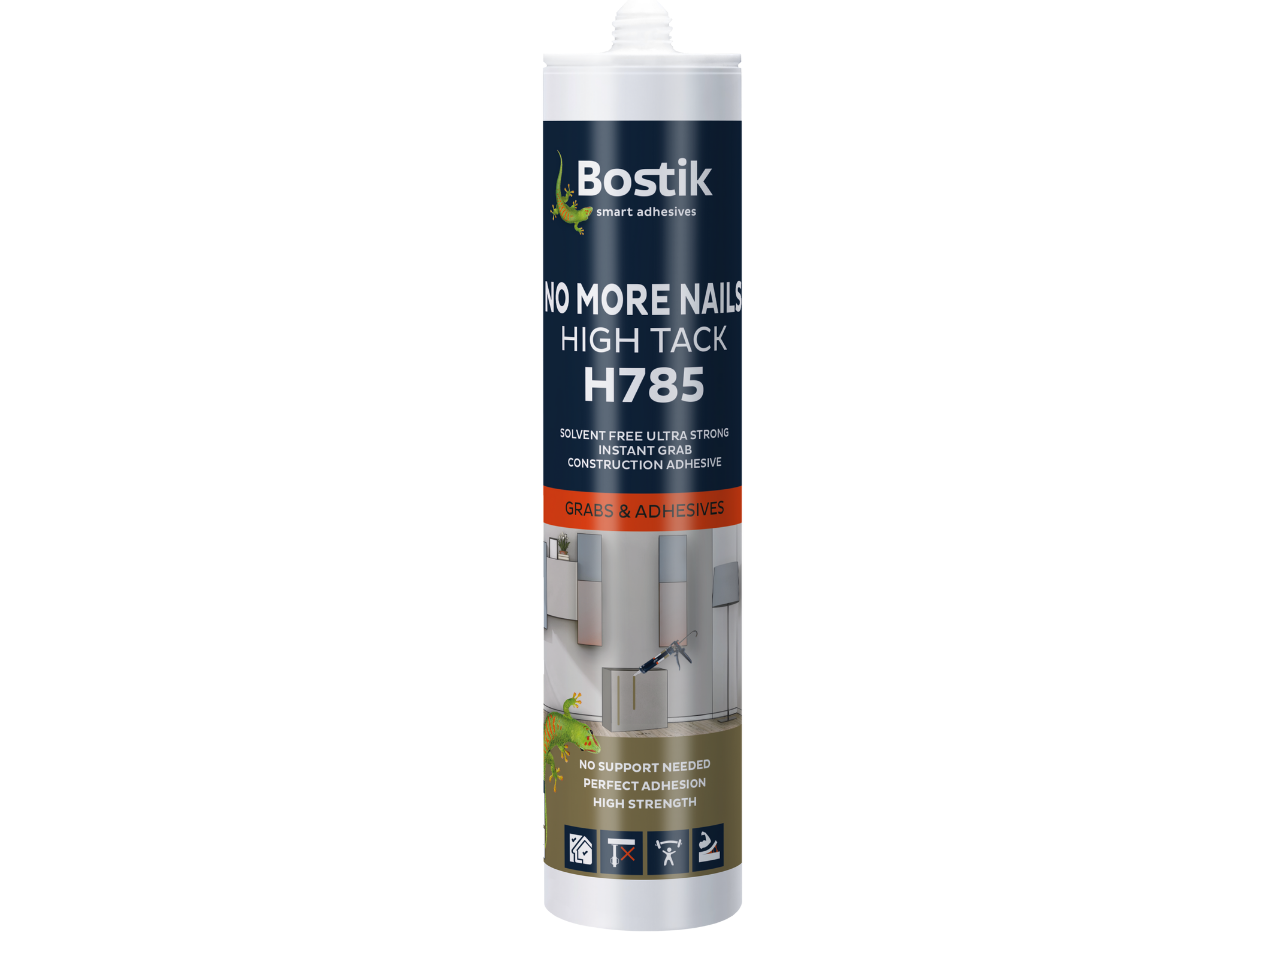 bostik-indonesia-product-image-h785.png